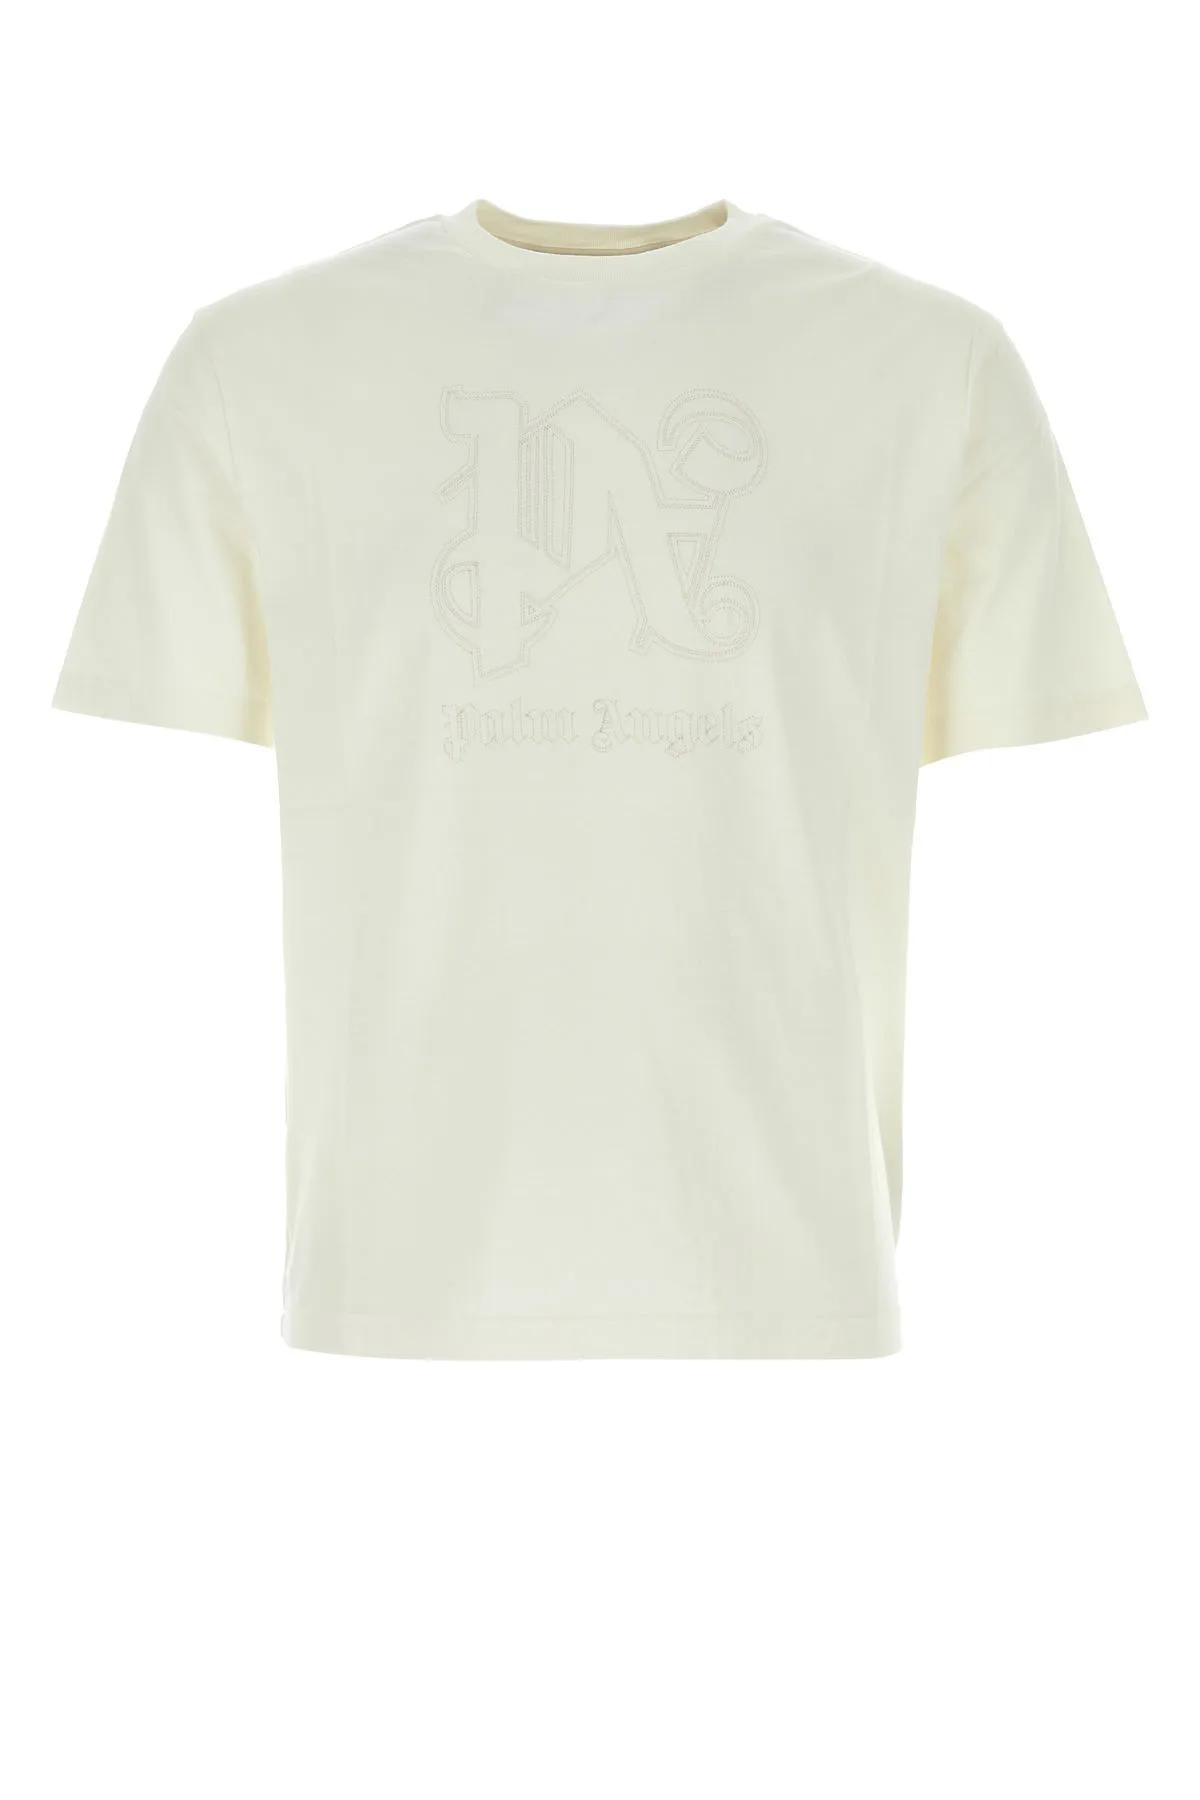 Palm Angels Ivory Cotton T-shirt In Neutral